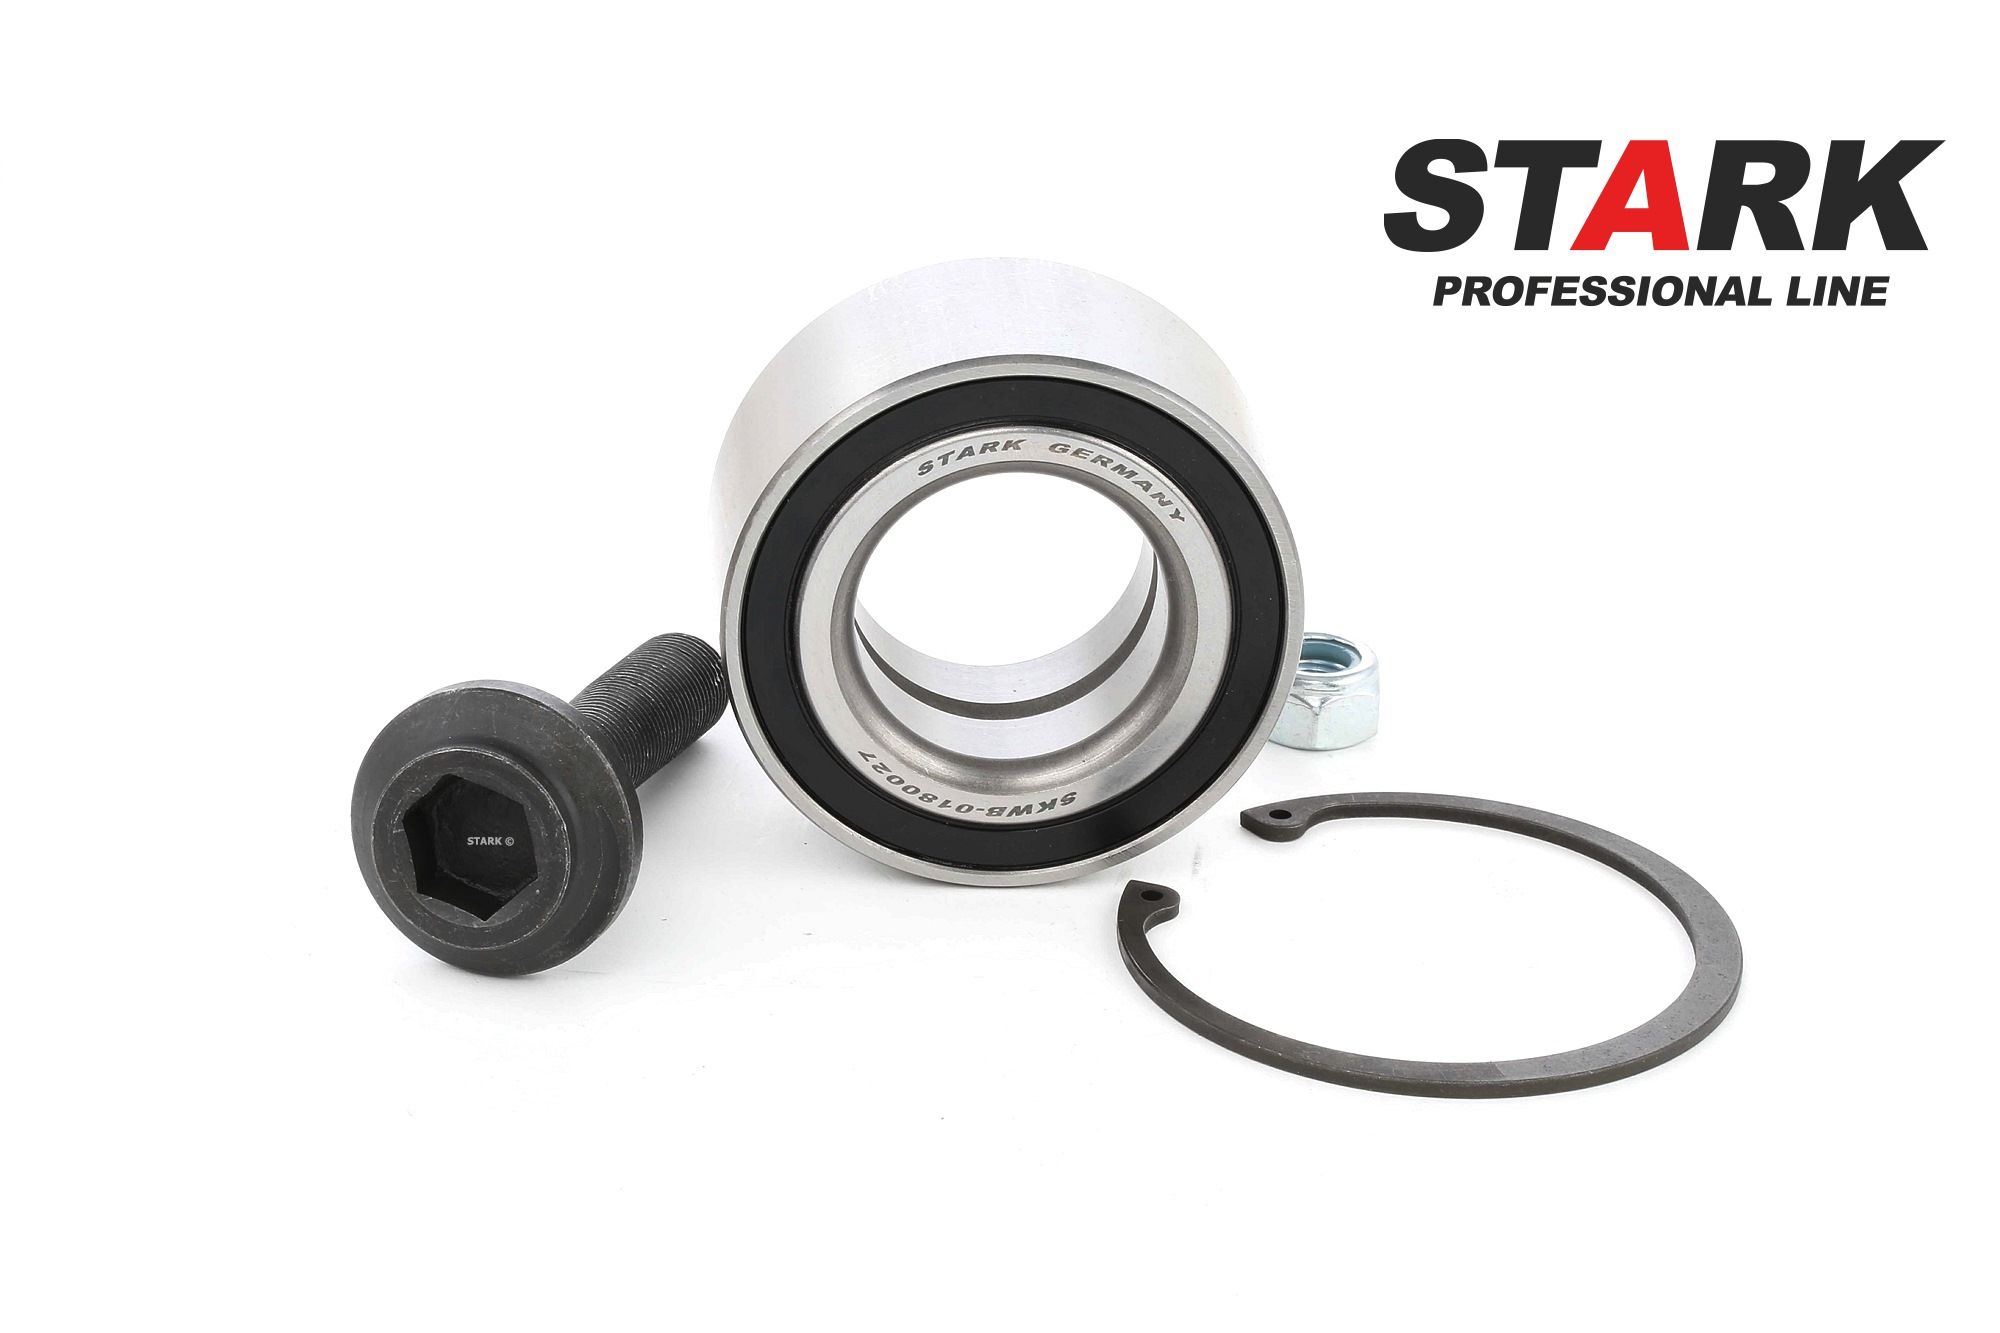 STARK SKWB-0180027 Wheel bearing kit Front Axle, without ABS sensor ring, with screw, 80 mm